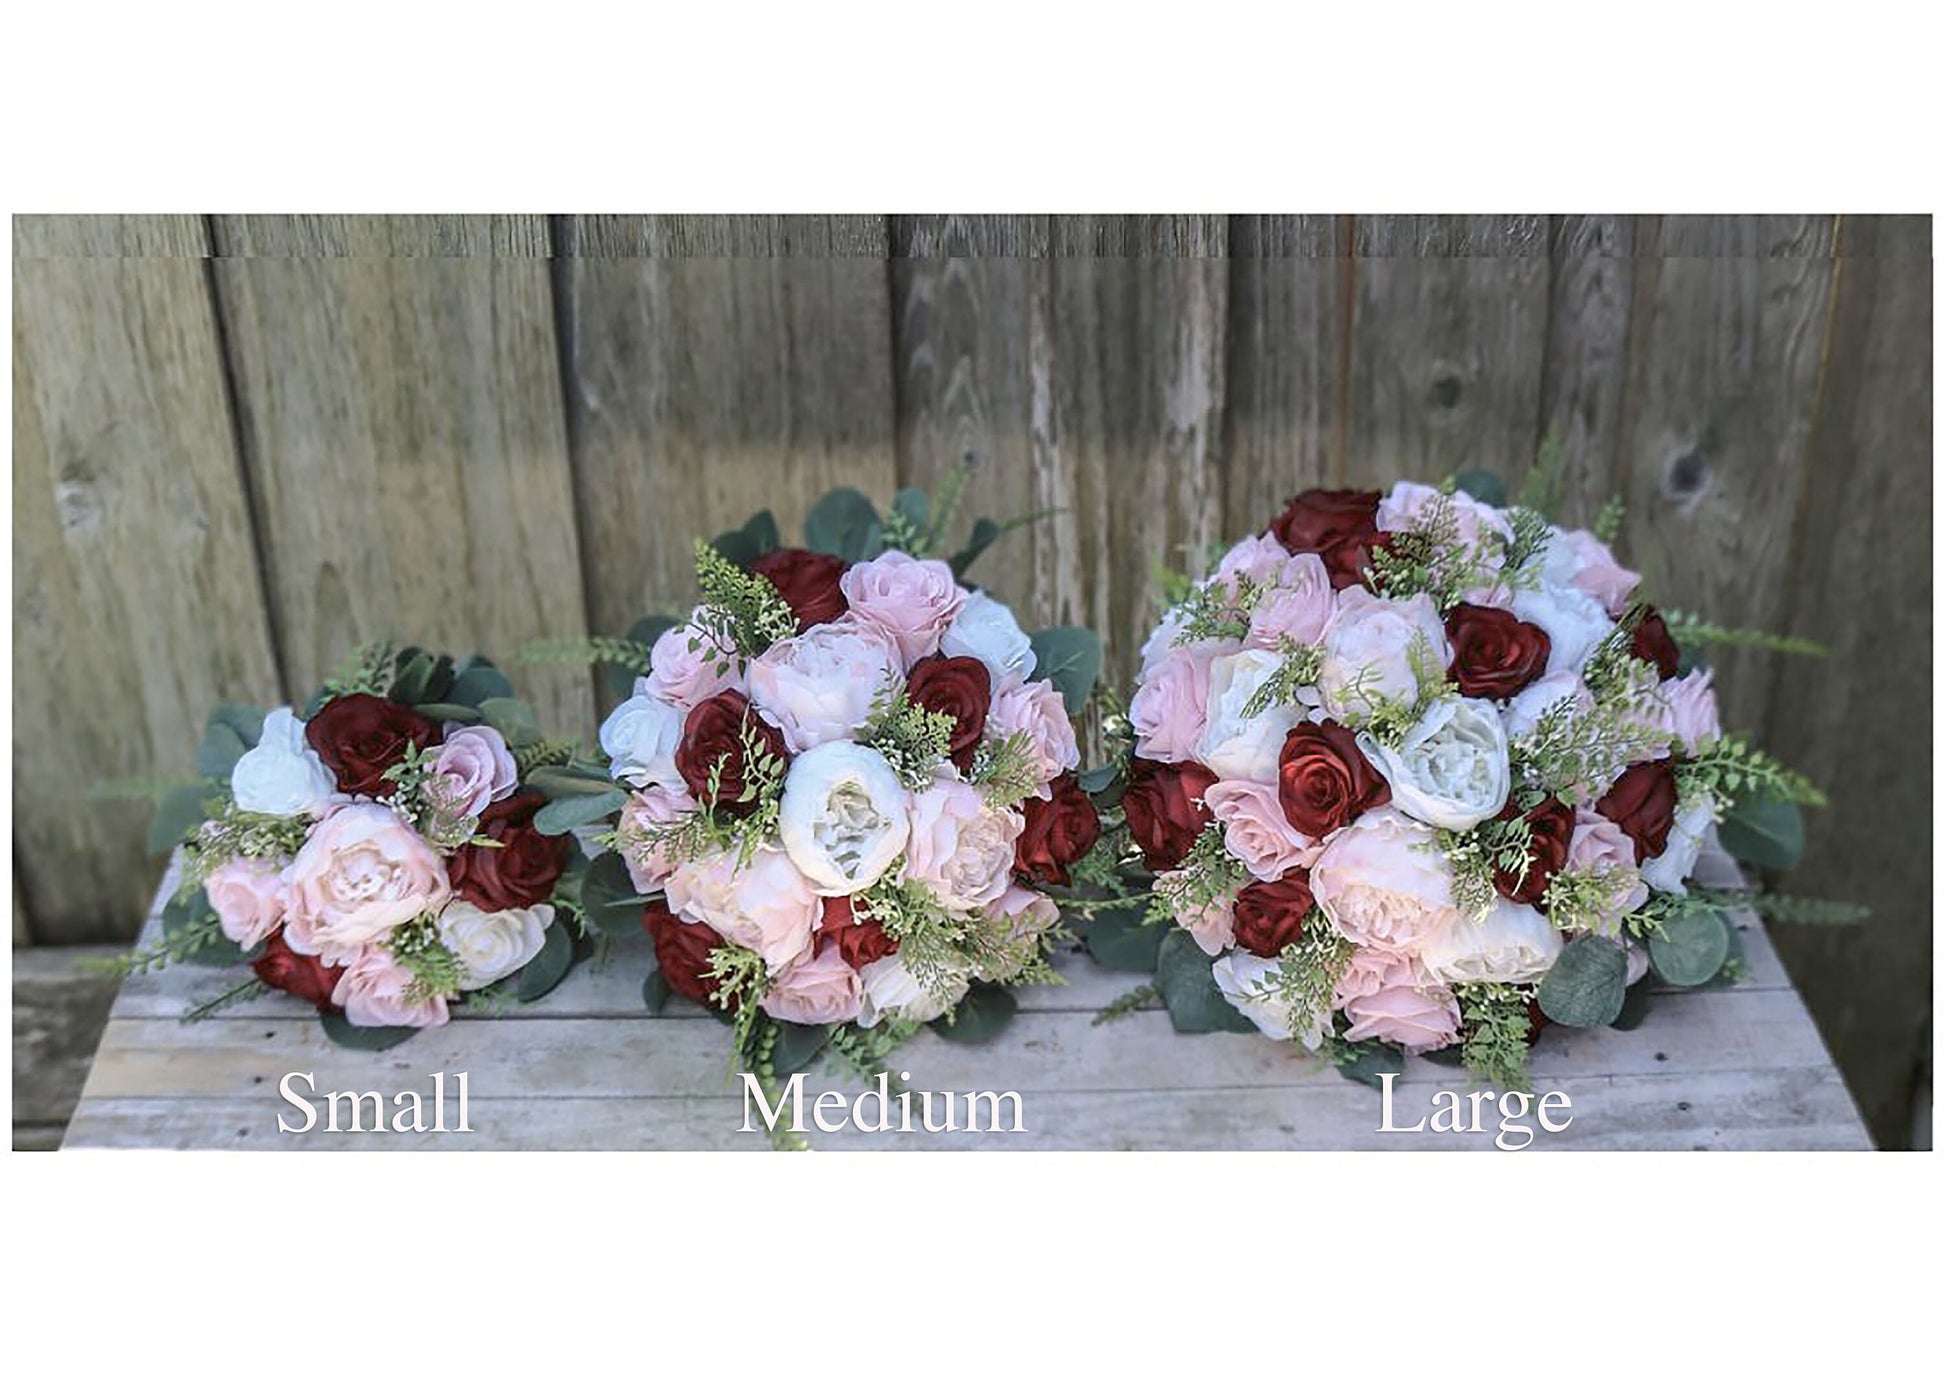 Wedding Floral Package, Boho Wedding Bouquets Wine Blush Pink Ivory, Artificial Wedding Flowers for Bride Bridesmaids Boutonniere Corsage